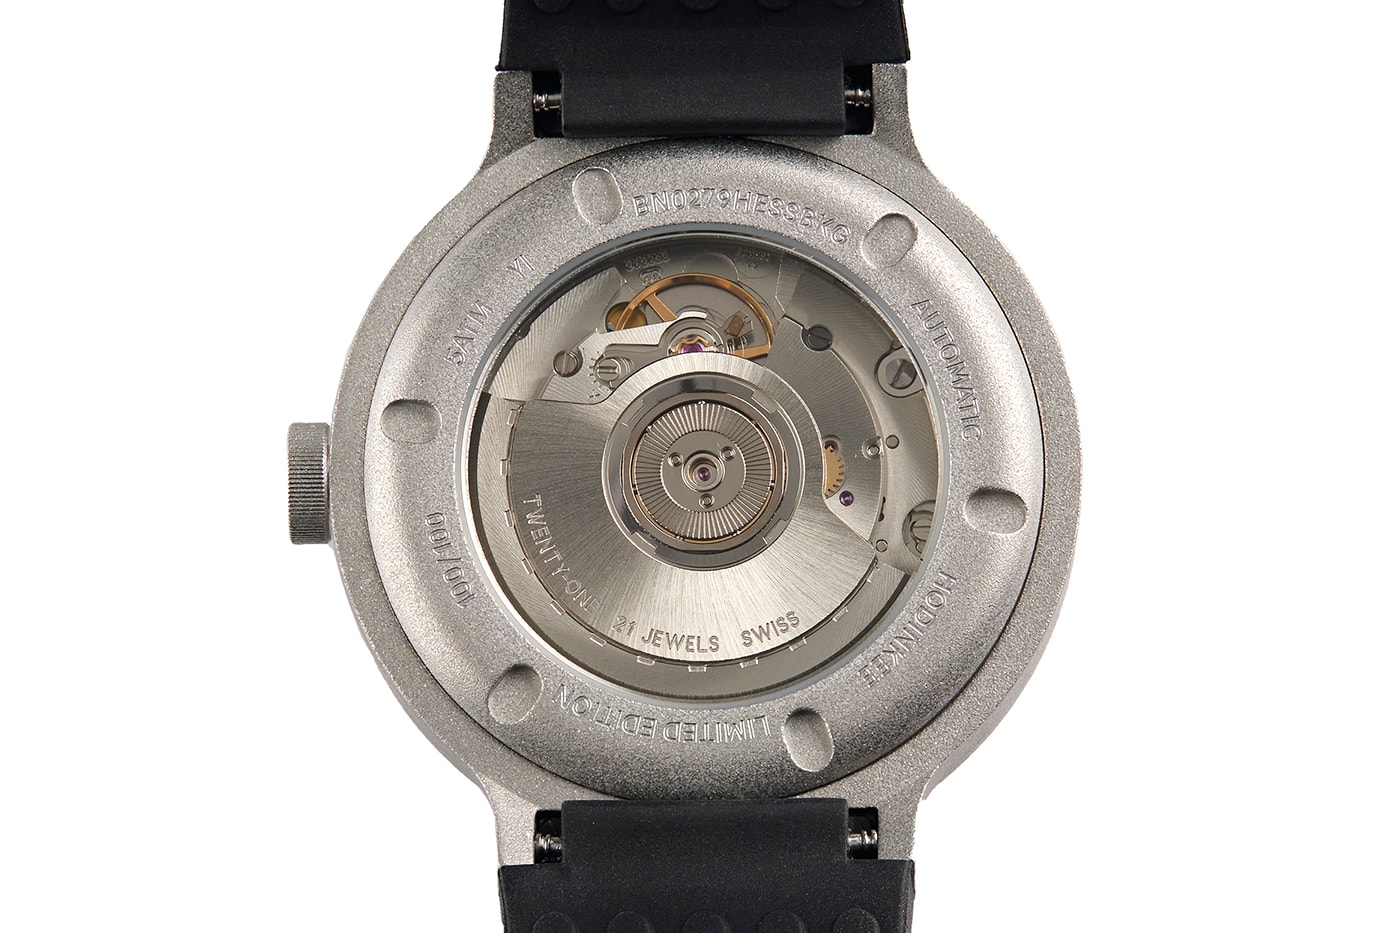 Braun BN0279 Center Seconds Sub-Seconds Limited Editions For Hodinkee Release Info